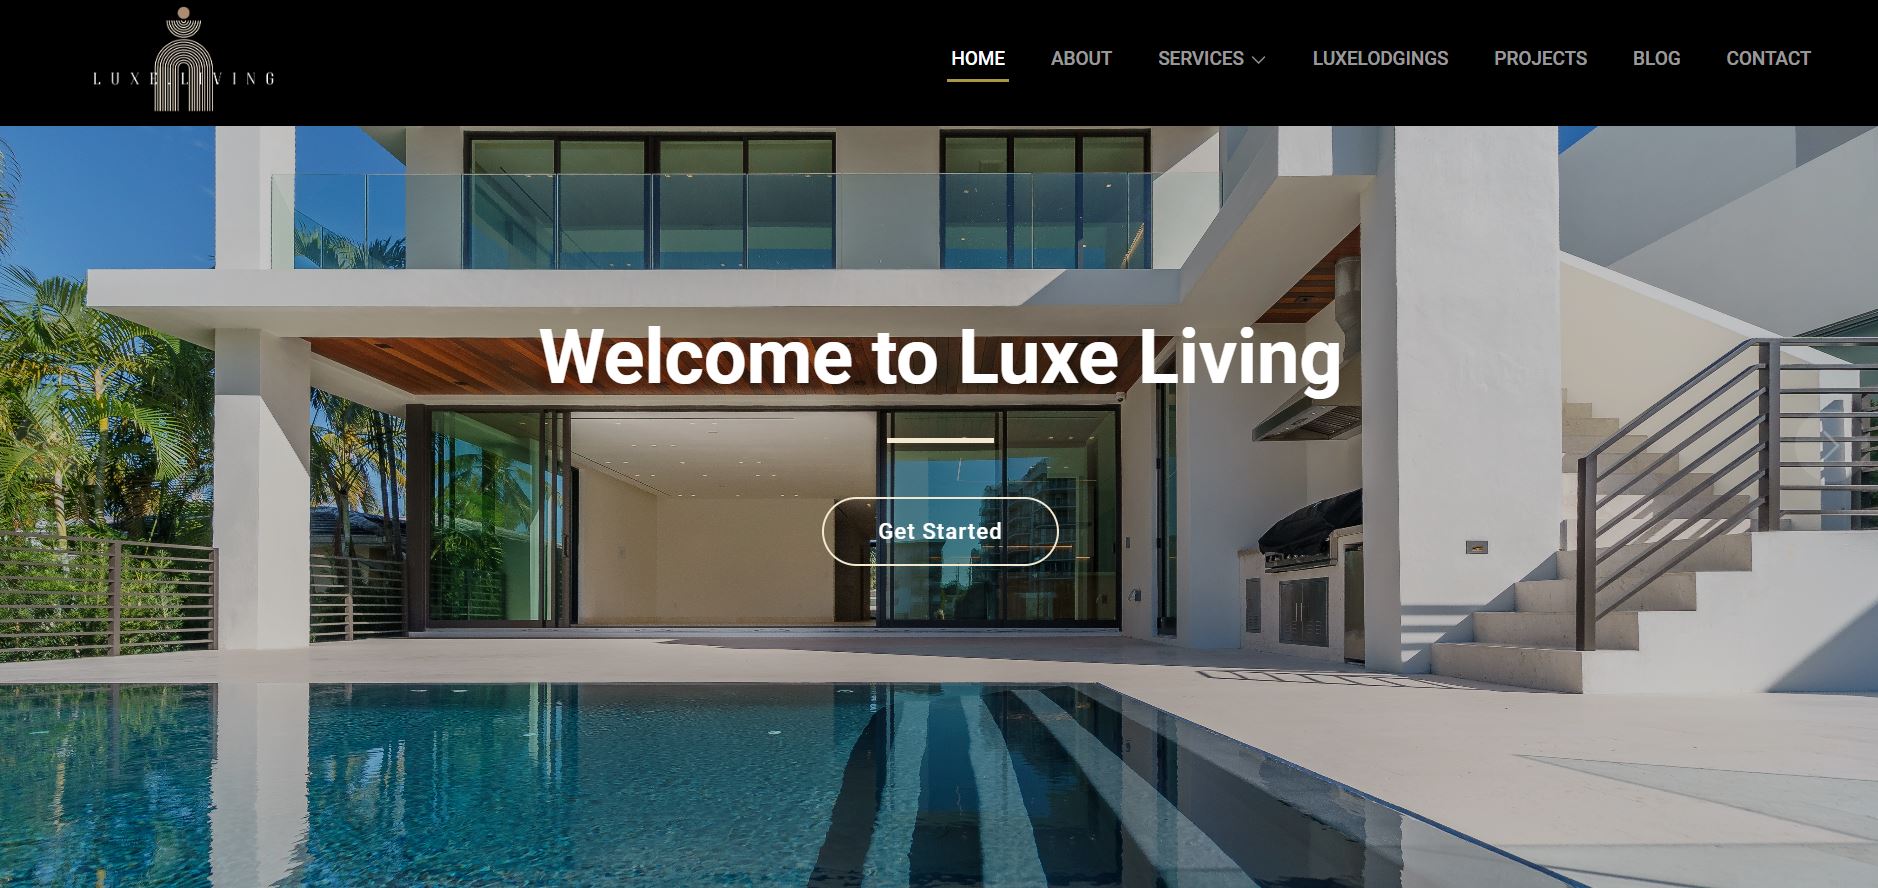 Web application design of a building makeover company displaying a residential building with a pool.